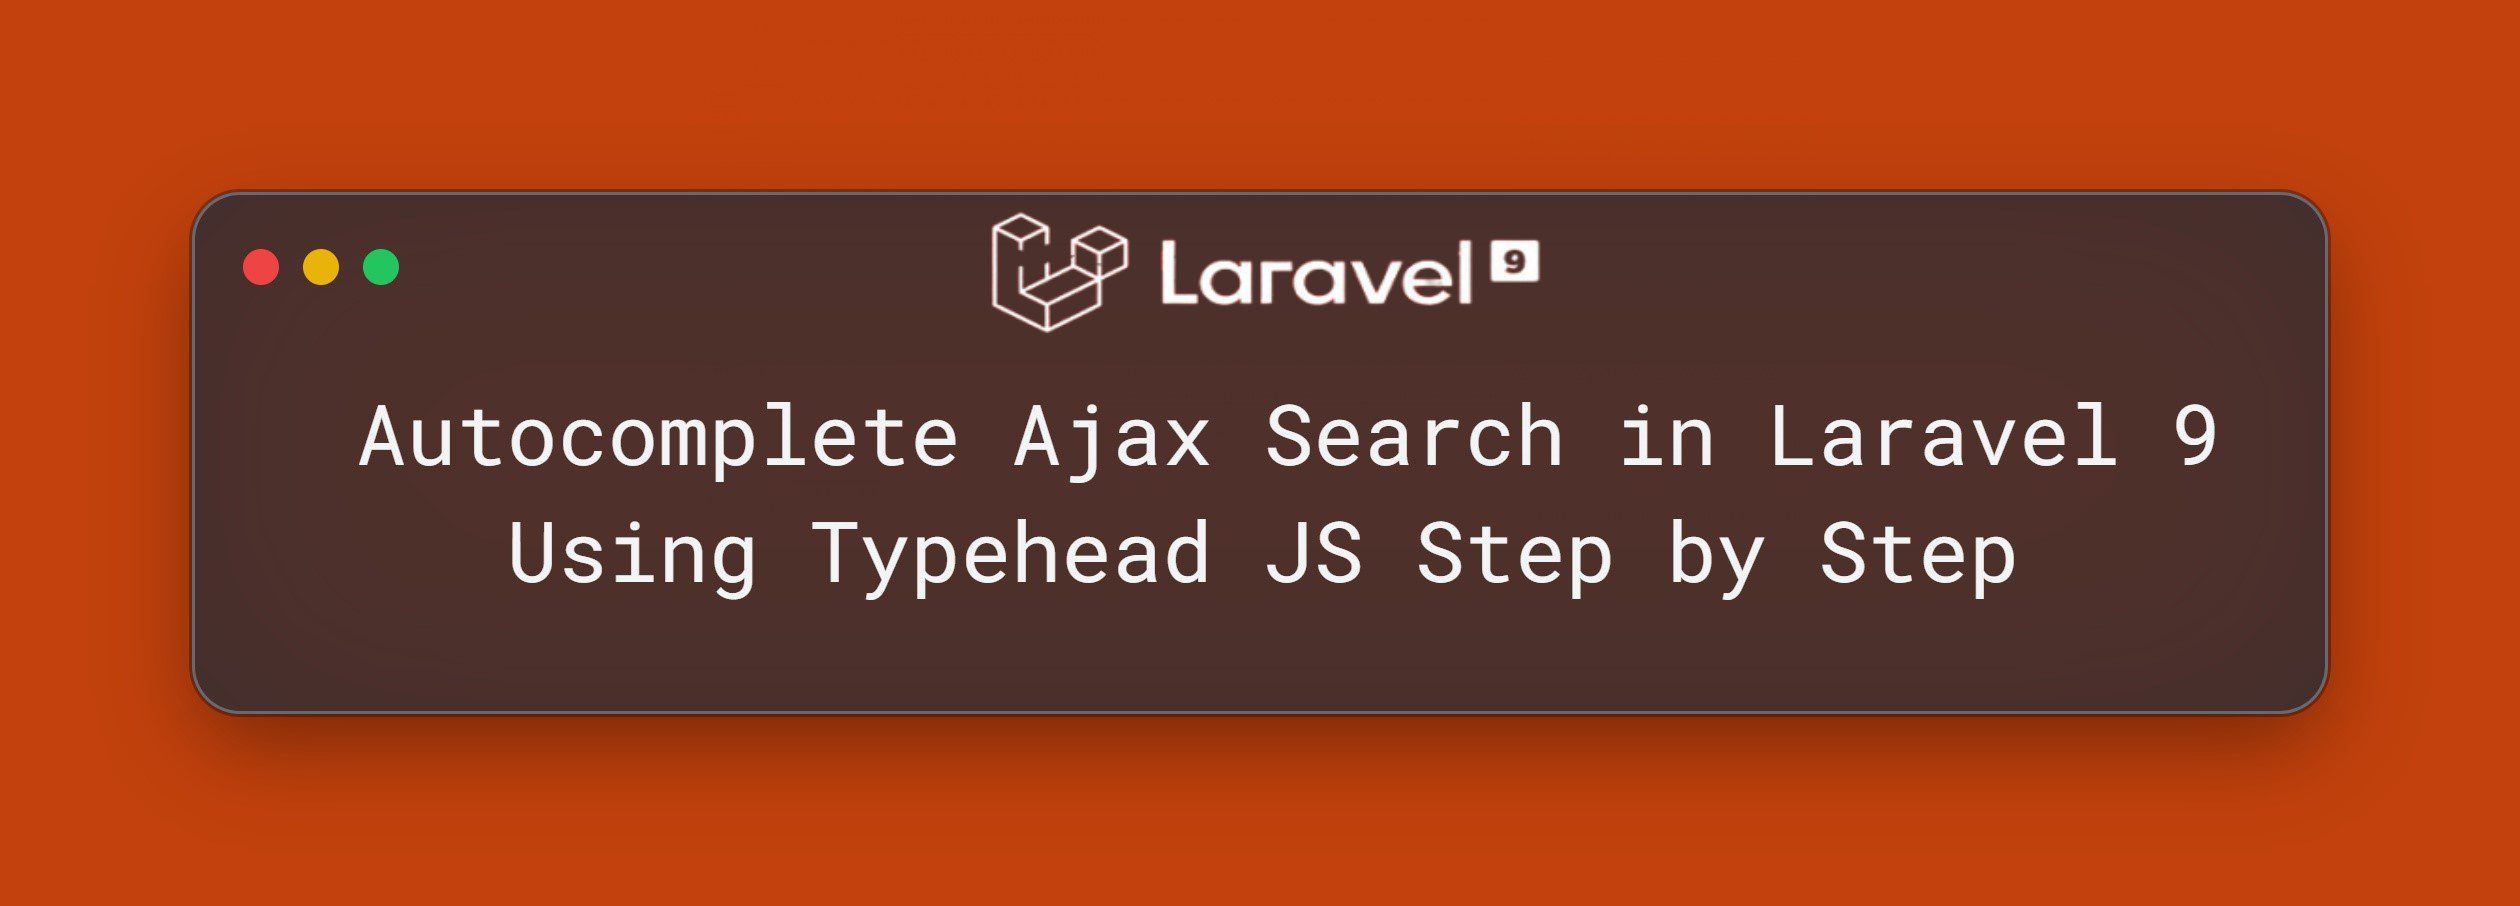 Autocomplete Ajax Search in Laravel 9 Using Typehead JS Step by Step